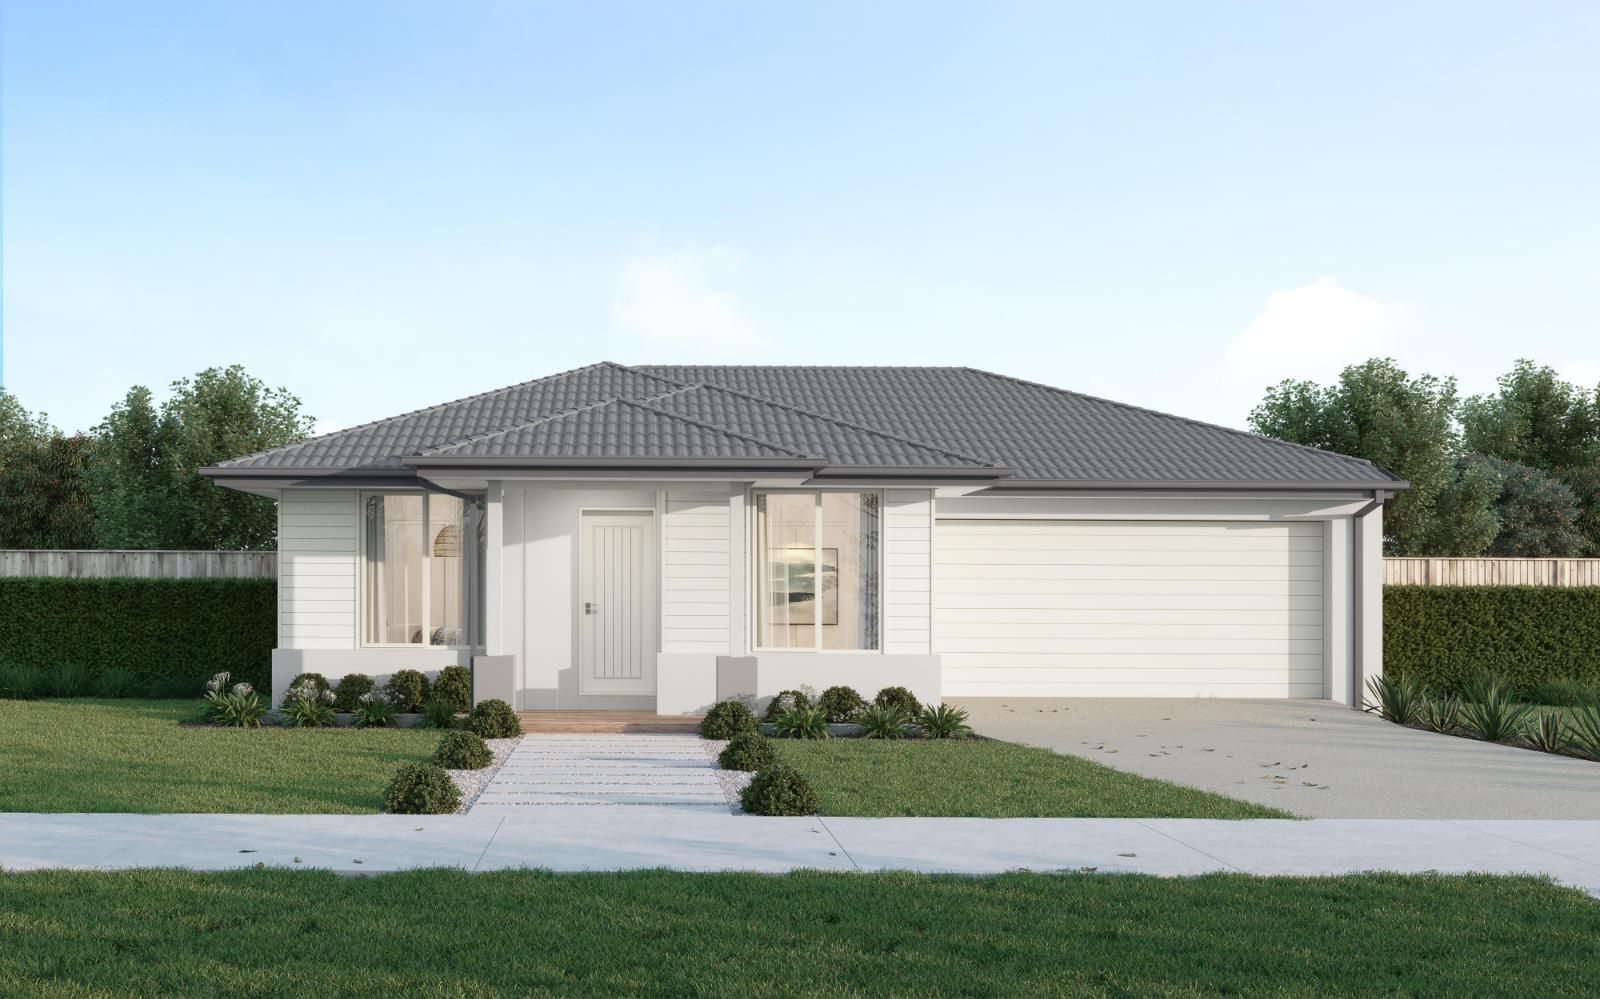 3 bedrooms New House & Land in 169 Plumpton Drive BONNIE BROOK VIC, 3335